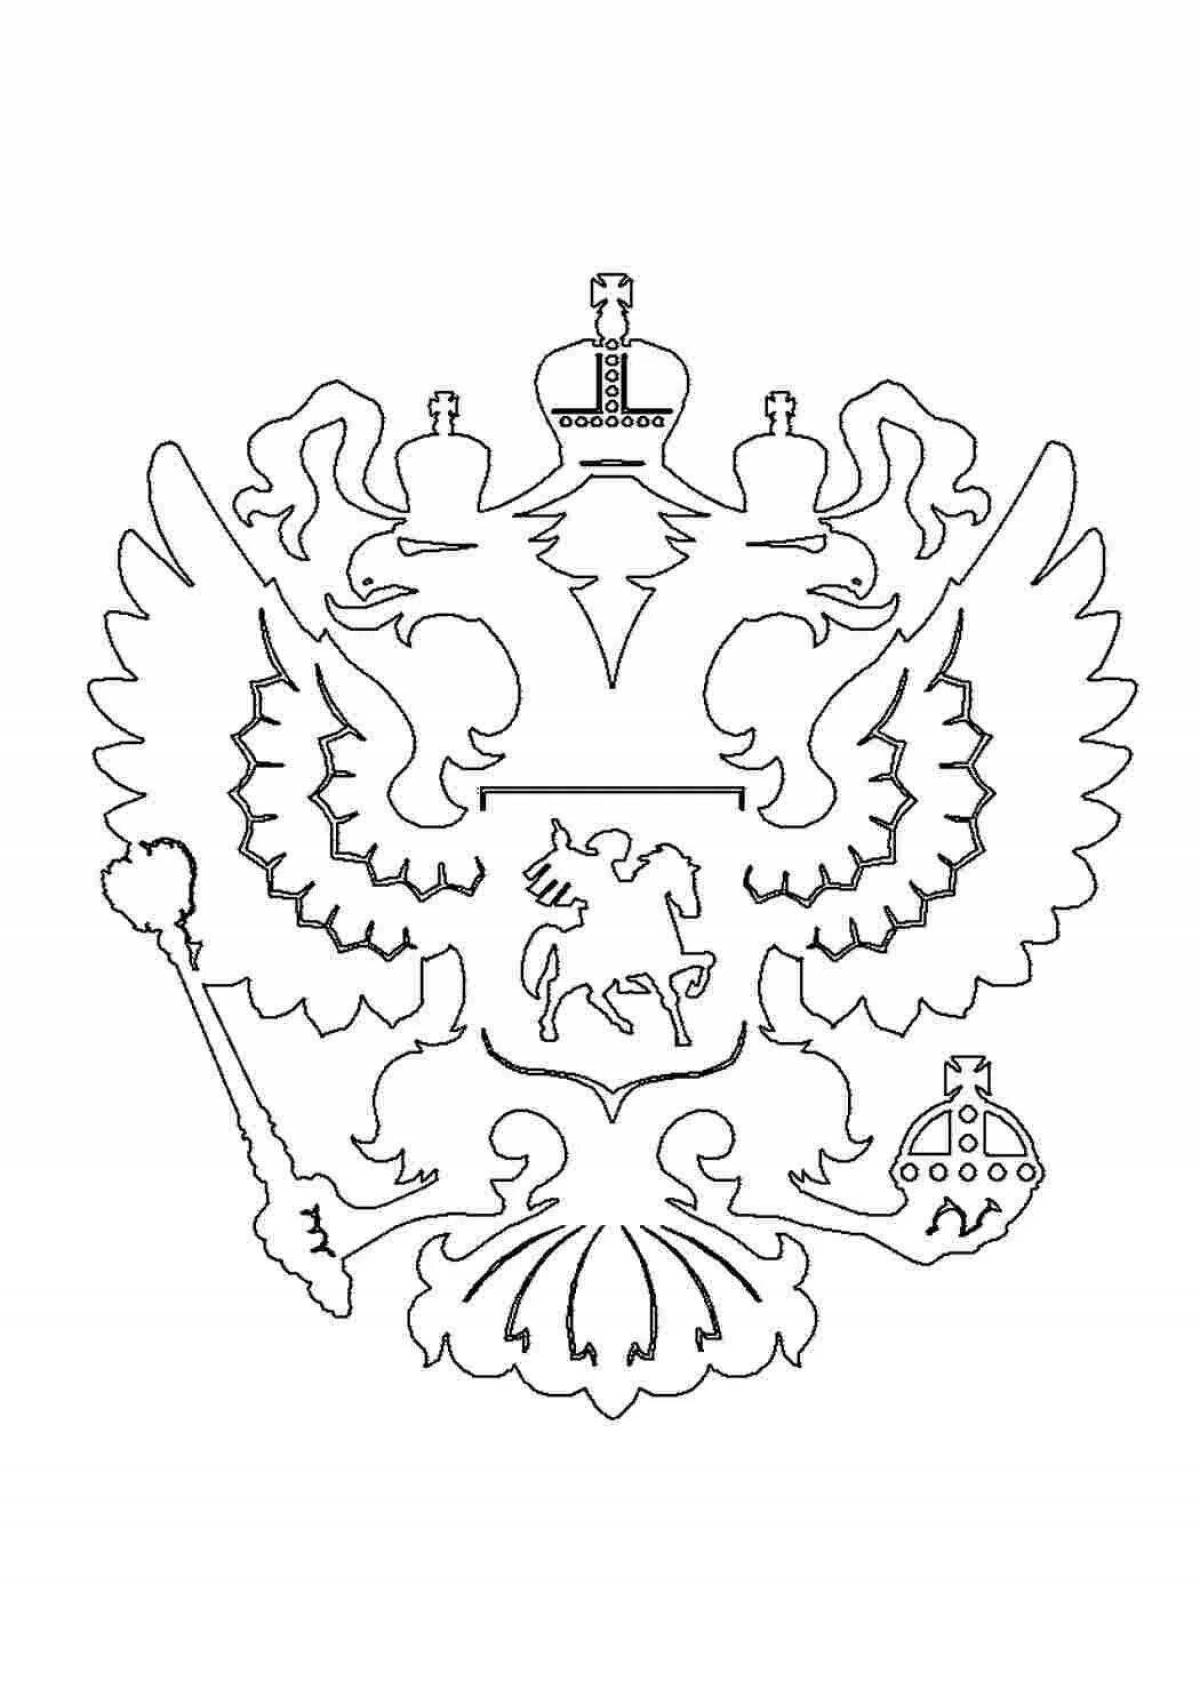 Dramatic coat of arms of Russia for preschoolers